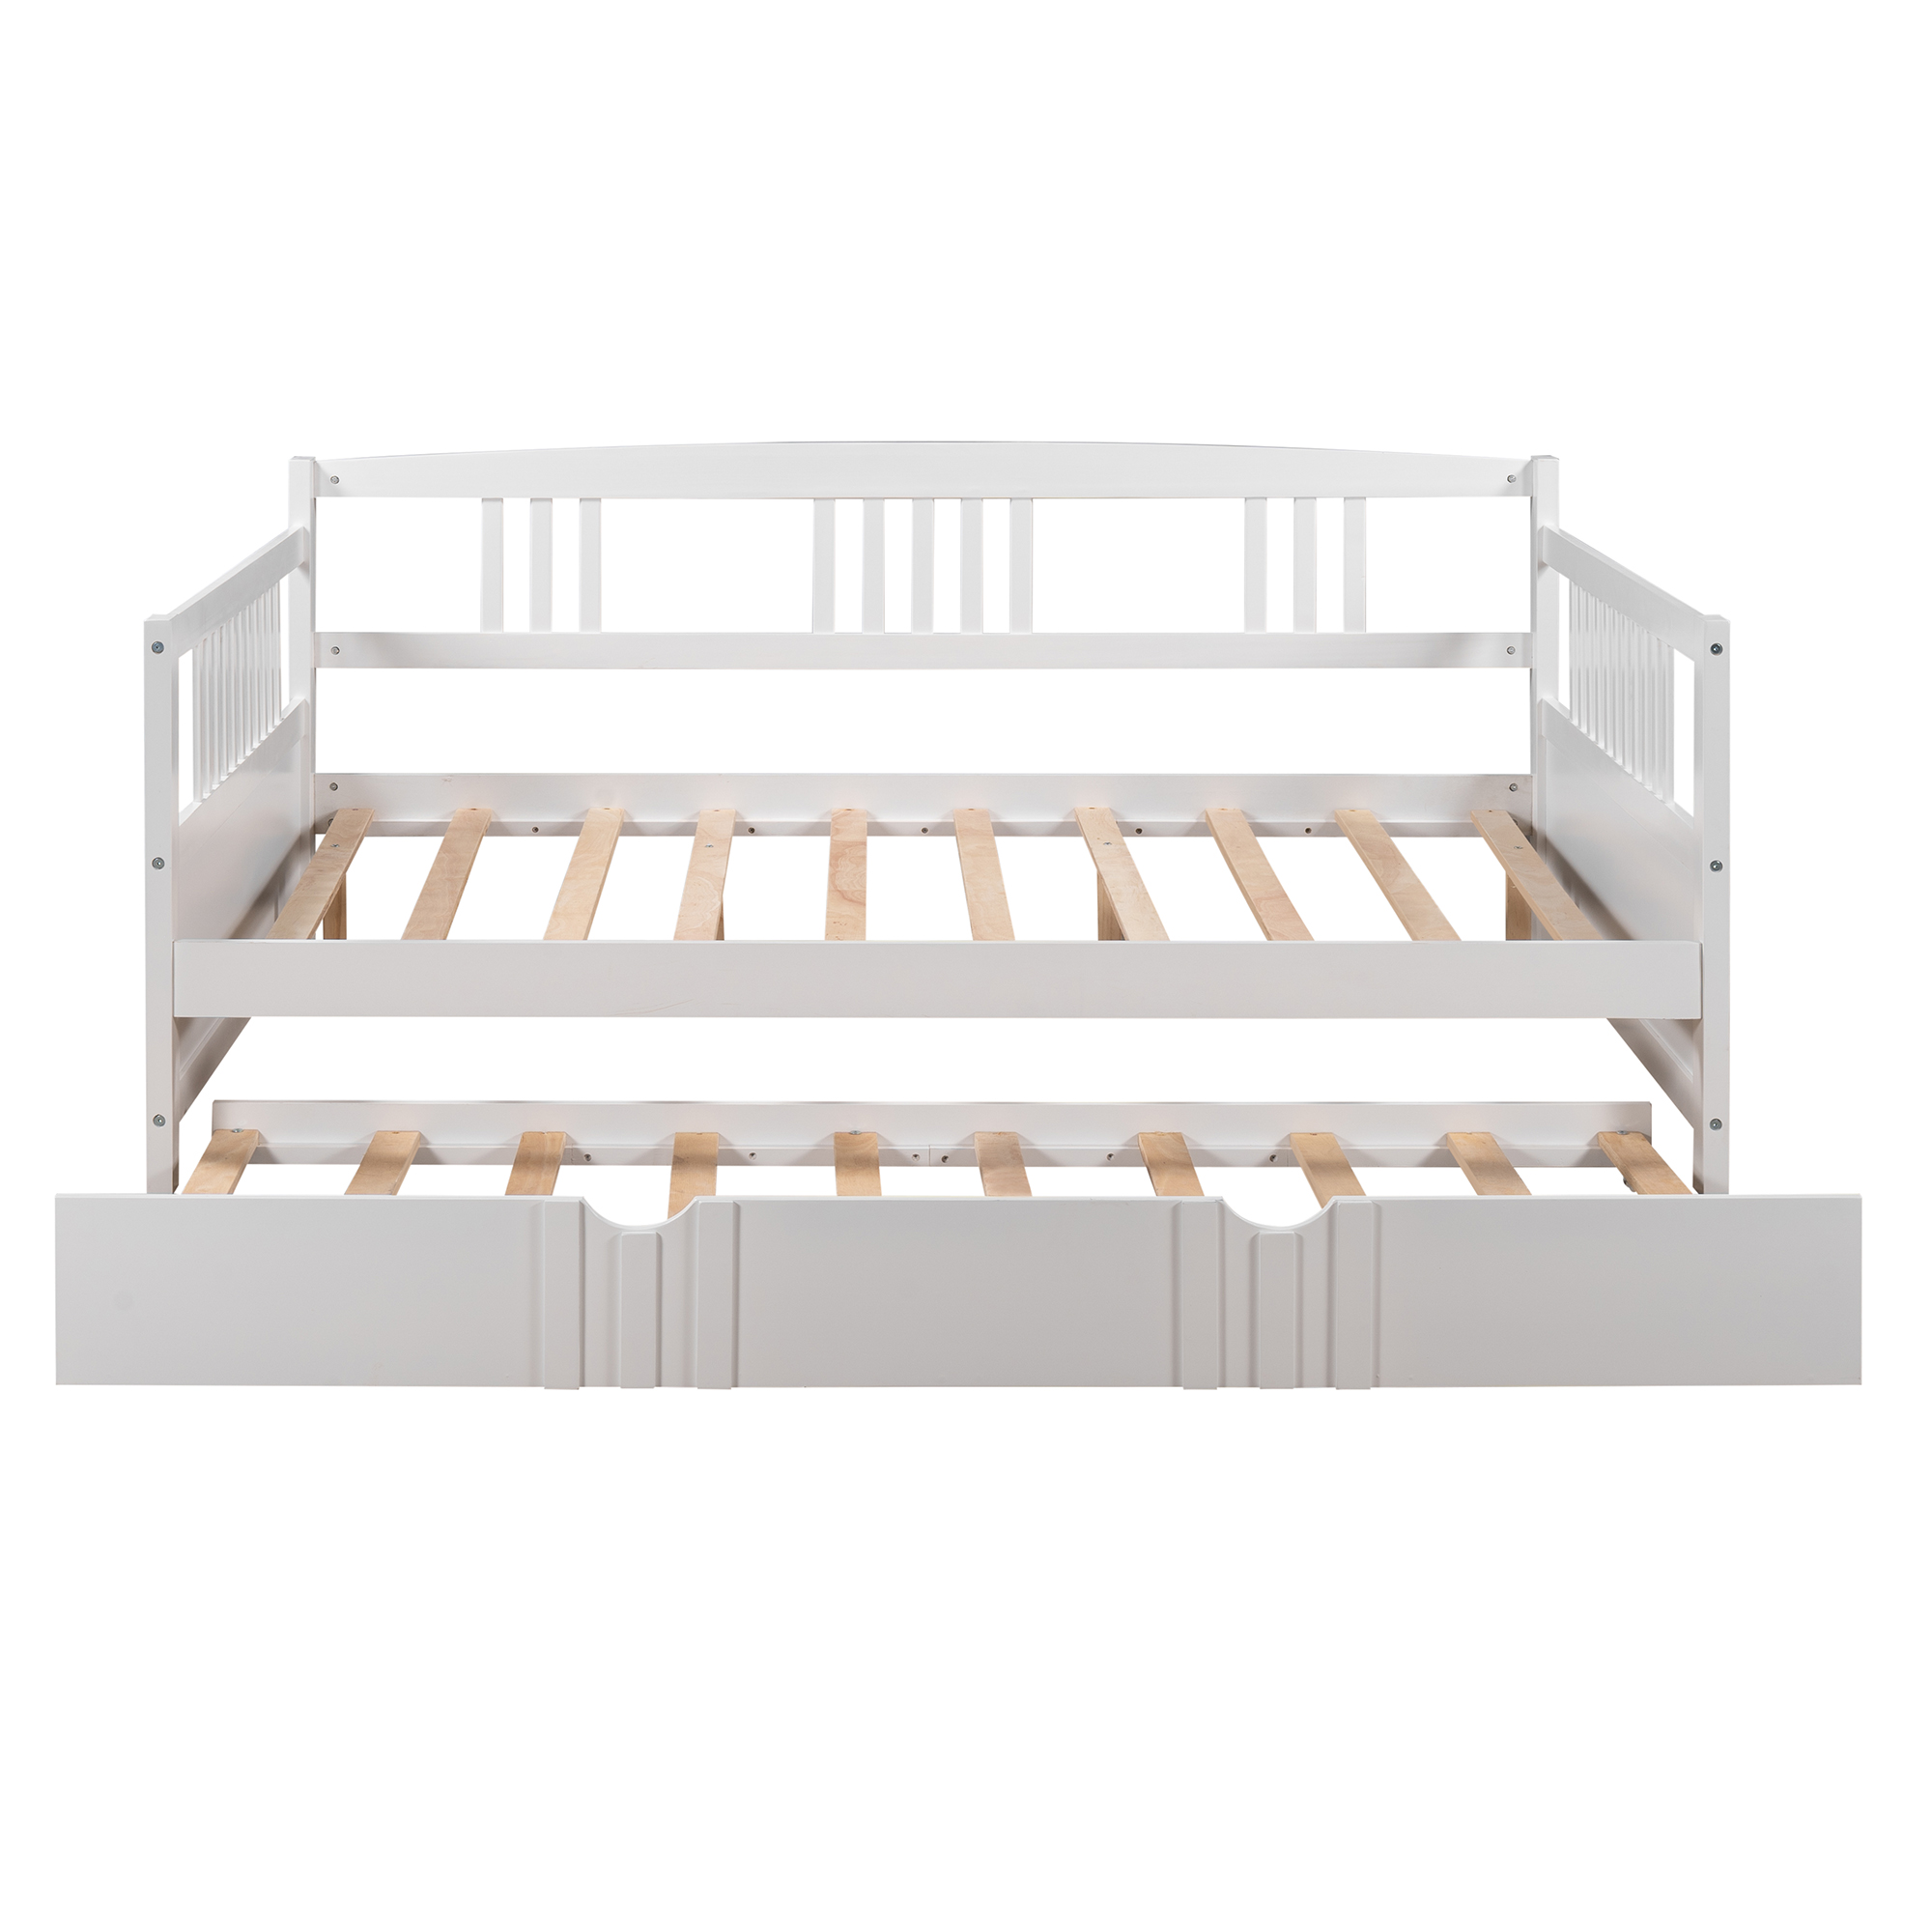 PAPROOS Daybed with Trundle Included, Full Size Daybed Bed Frame with Pull Out Trundle Bed and Wooden Slats, Solid Wood Sofa Bed Full Daybed, No Box Spring Needed, White - image 3 of 12